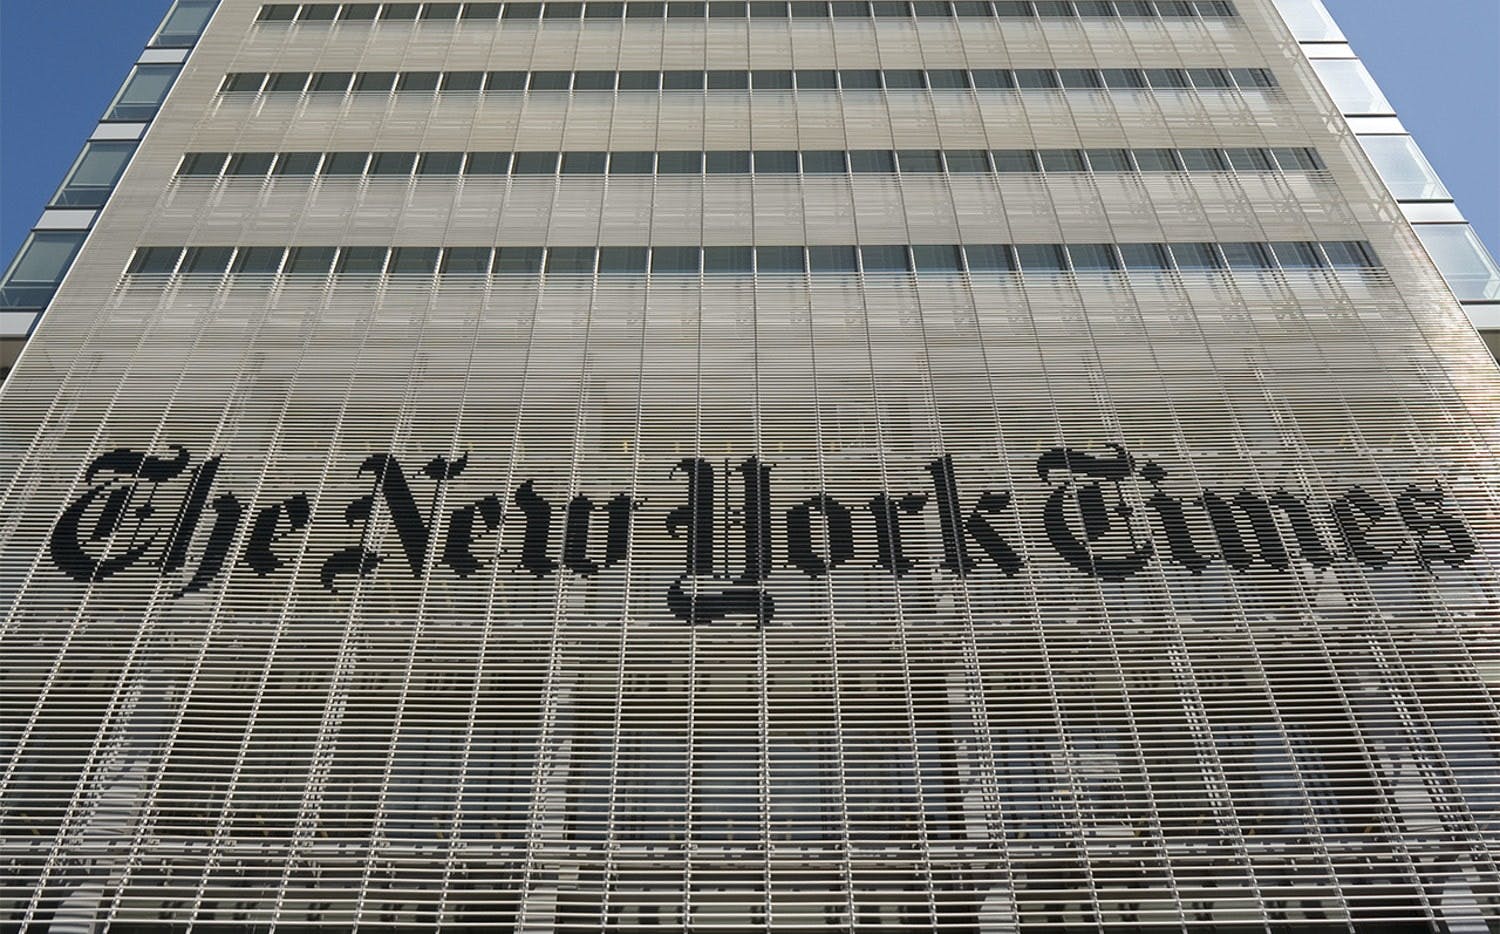 Signage on The New York Times Building